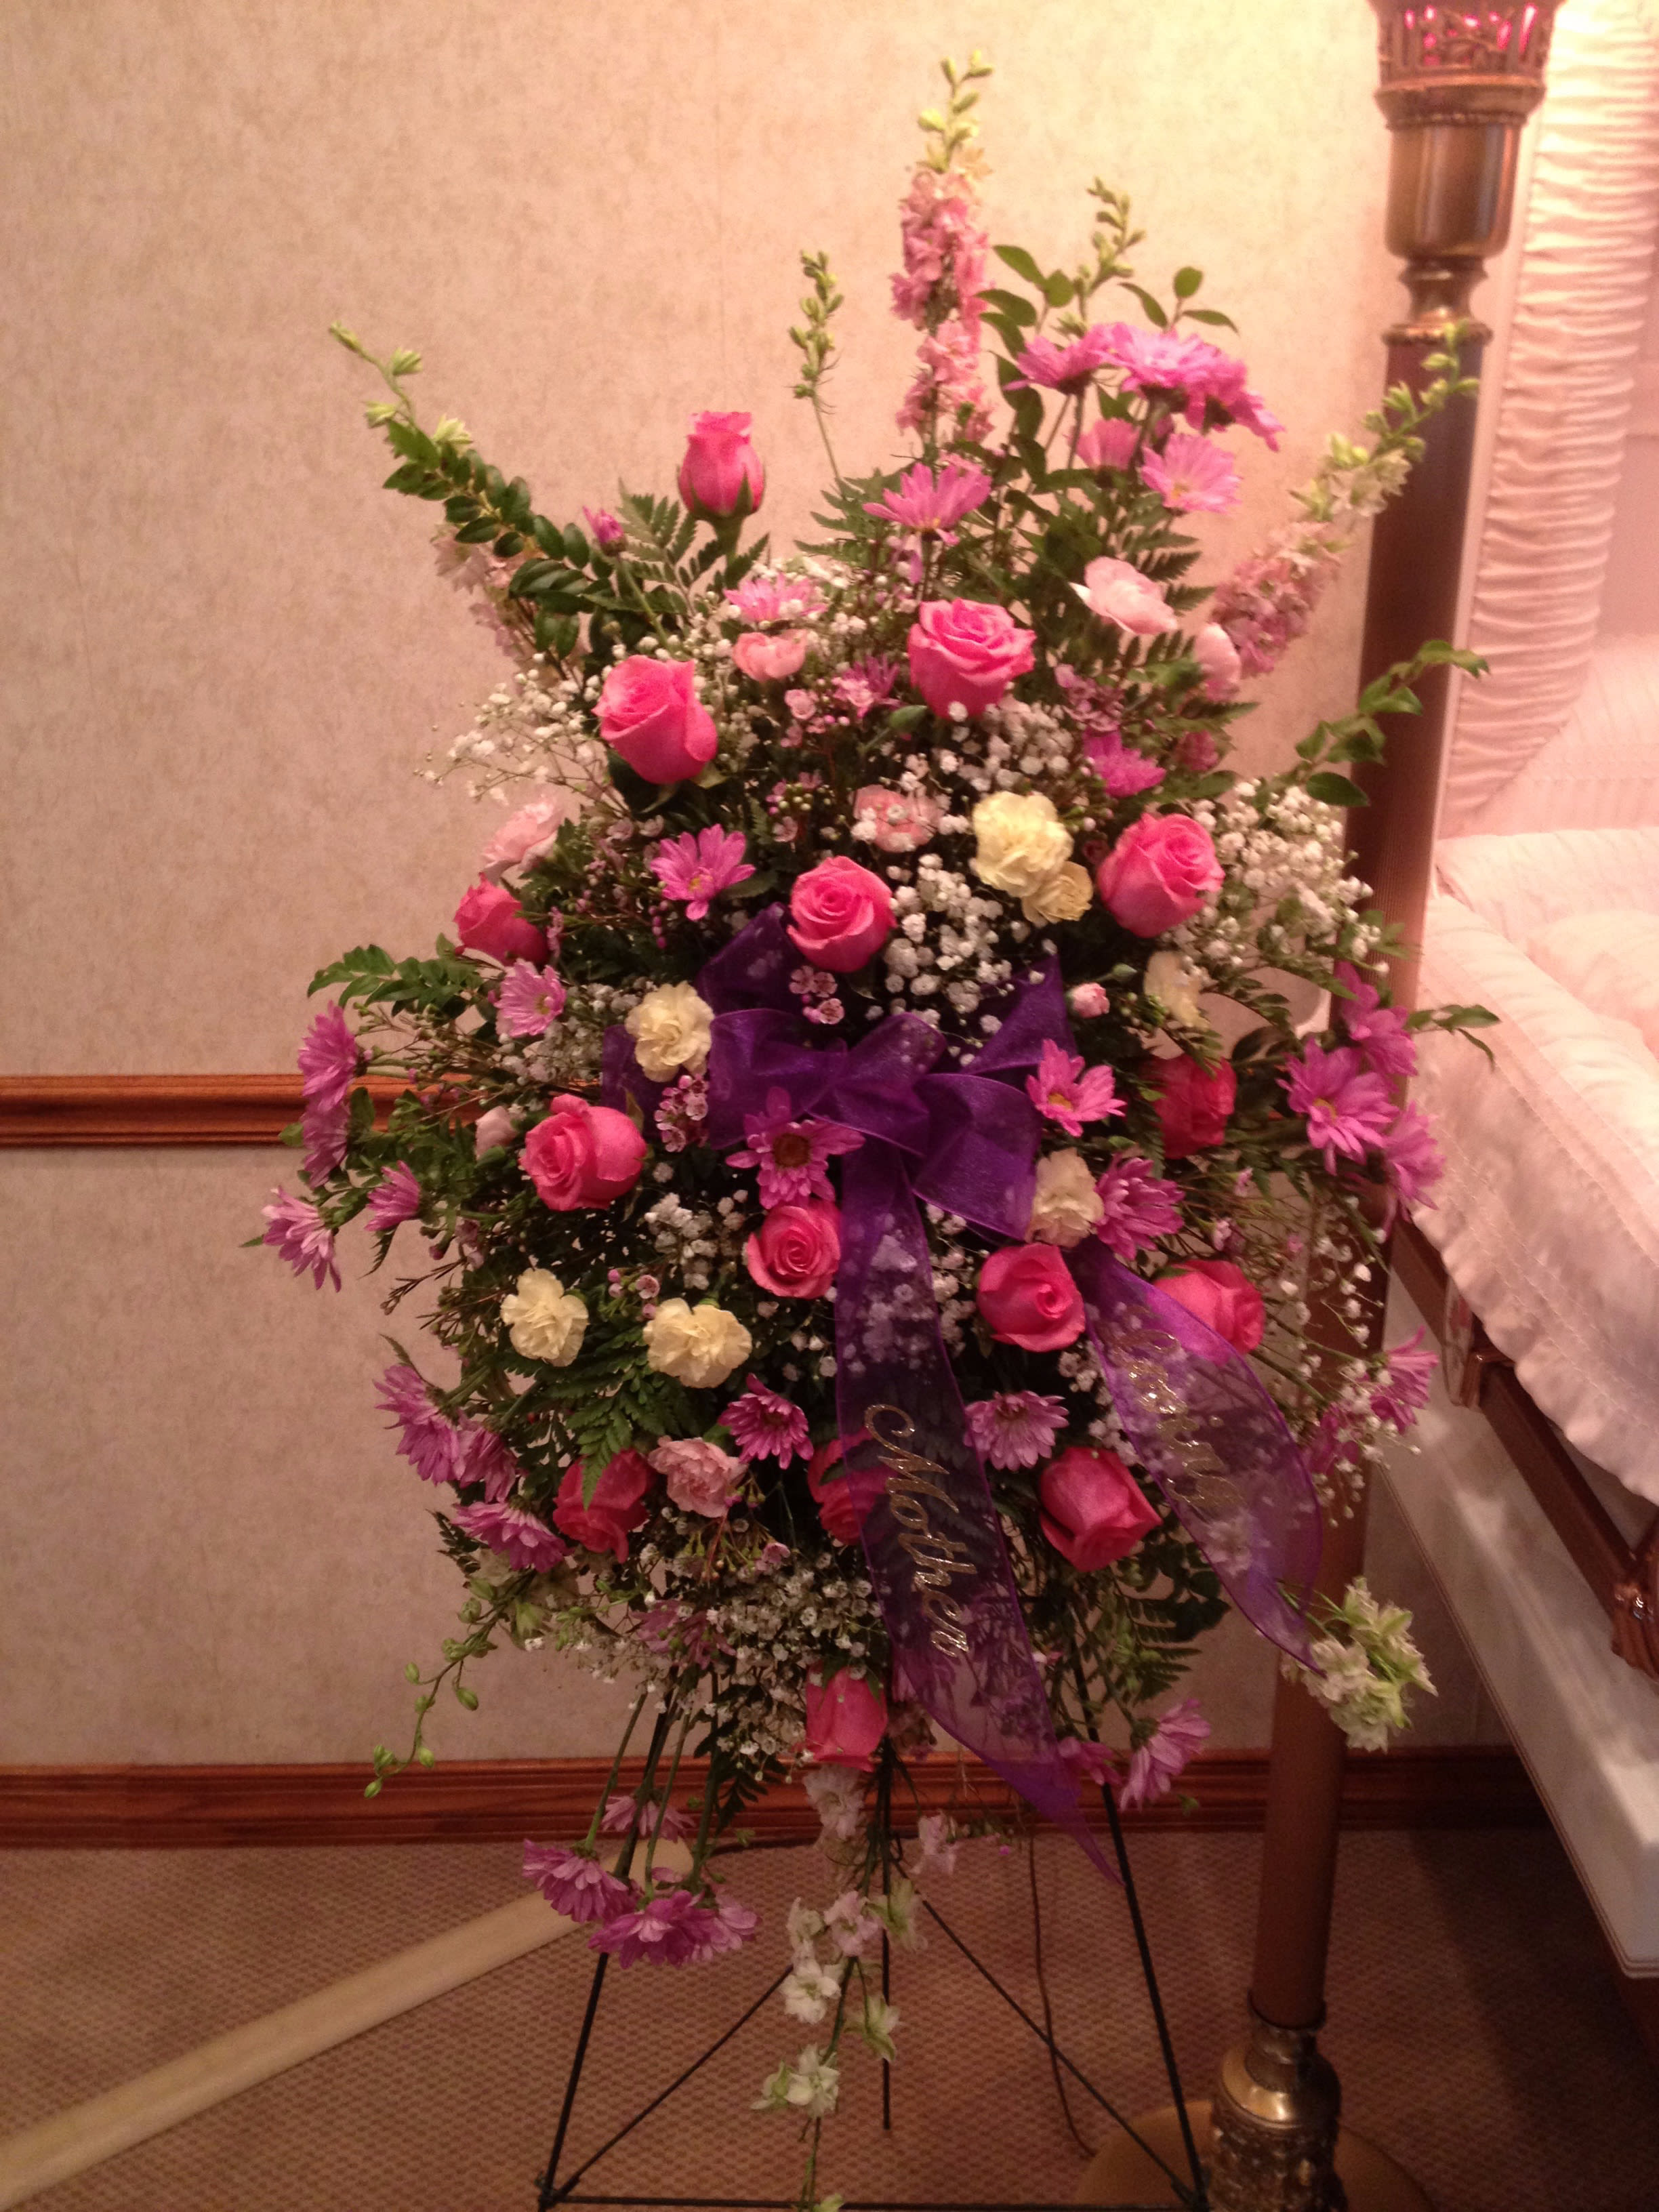  Touching Tribute Spray - Express admiration for her beauty and spirit with a striking tribute certain to evoke many cherished remembrances.  Gorgeous flowers such as pink roses, larkspur, daisies, mini-carnations and  baby's breath make up this thoughtful tribute.      Orientation: One-Sided 